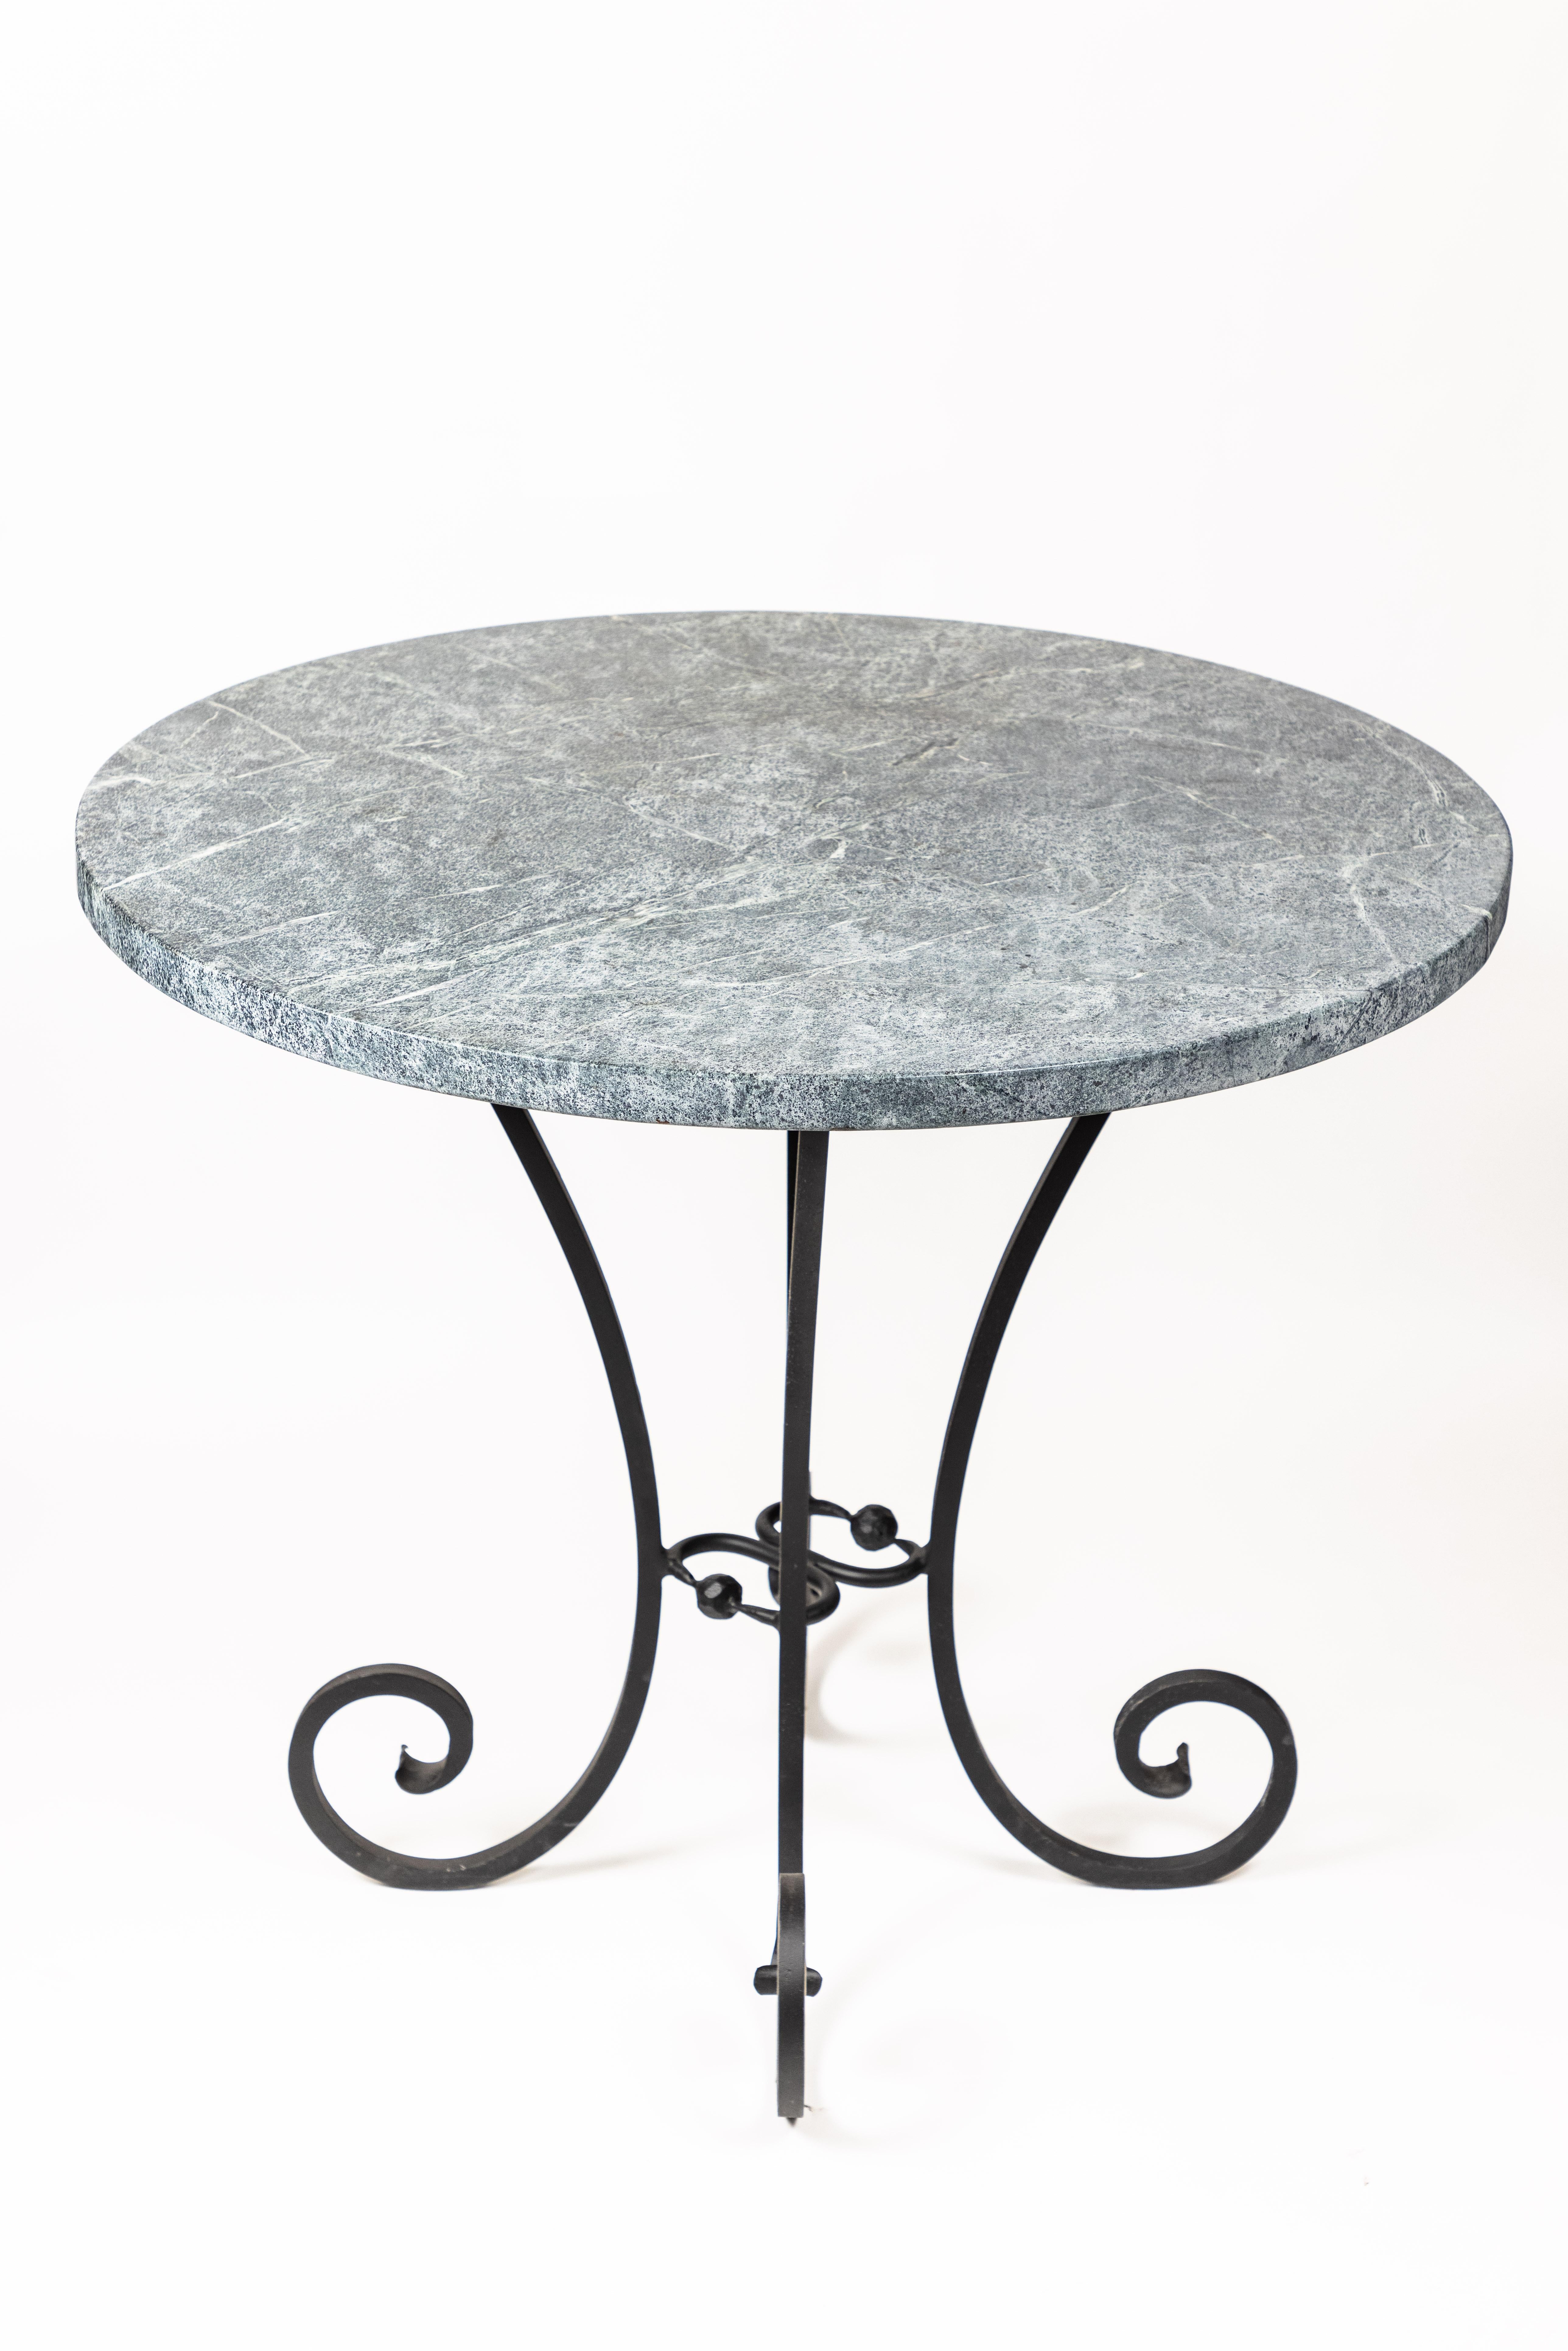 Painted Vintage Hand Forged Iron Base Table with Round Soapstone Top